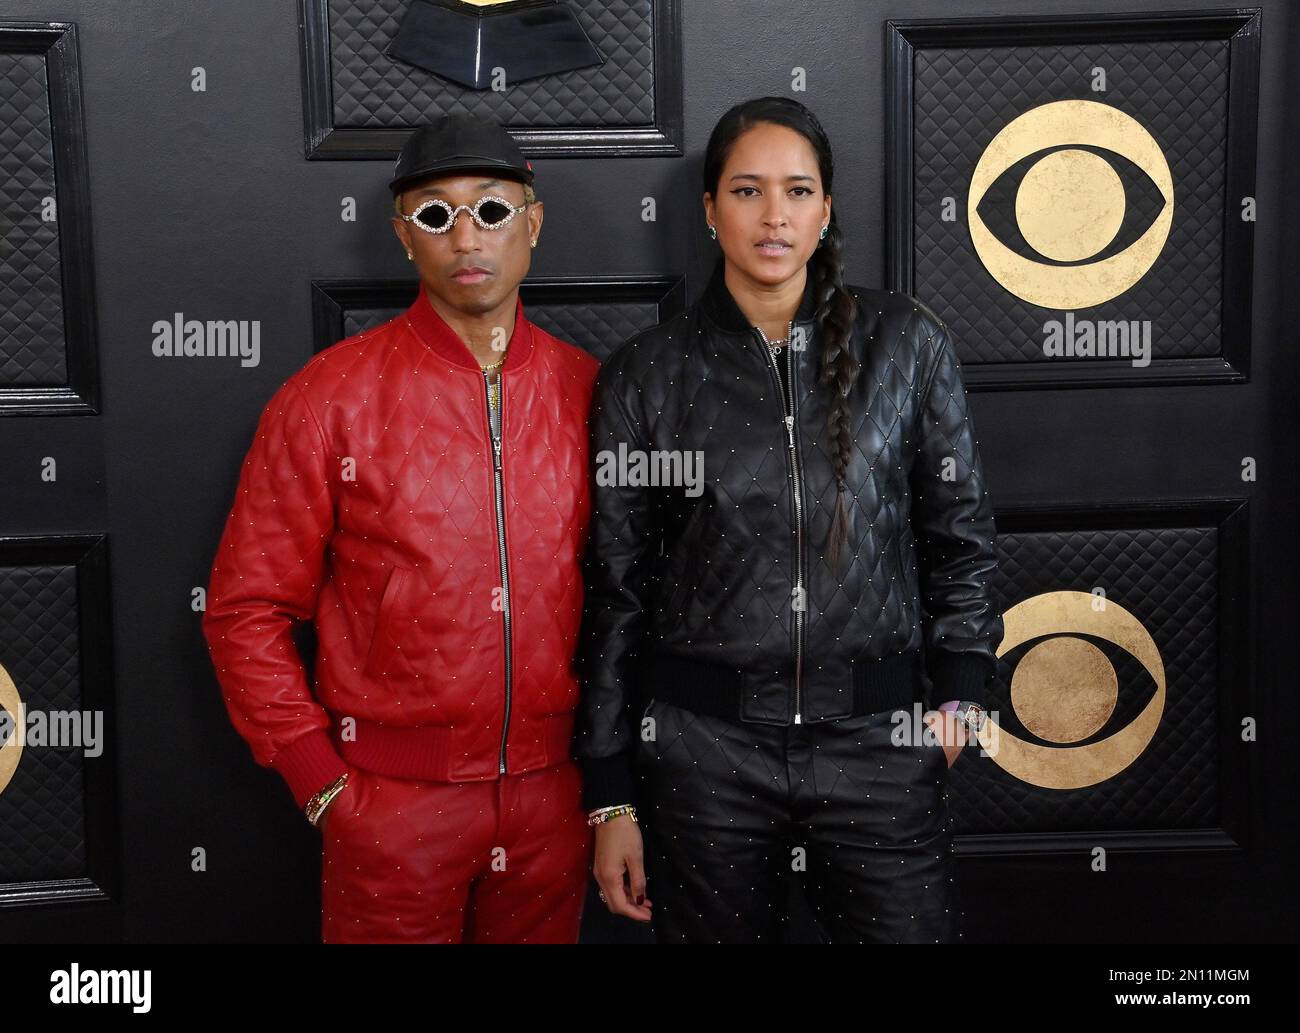 Los Angeles, United States. 05th Feb, 2023. Pharrell Williams and Helen  Lasichanh attend the 65th annual Grammy Awards at the Crypto.com Arena in  Los Angeles on Sunday, February 5, 2023. Photo by